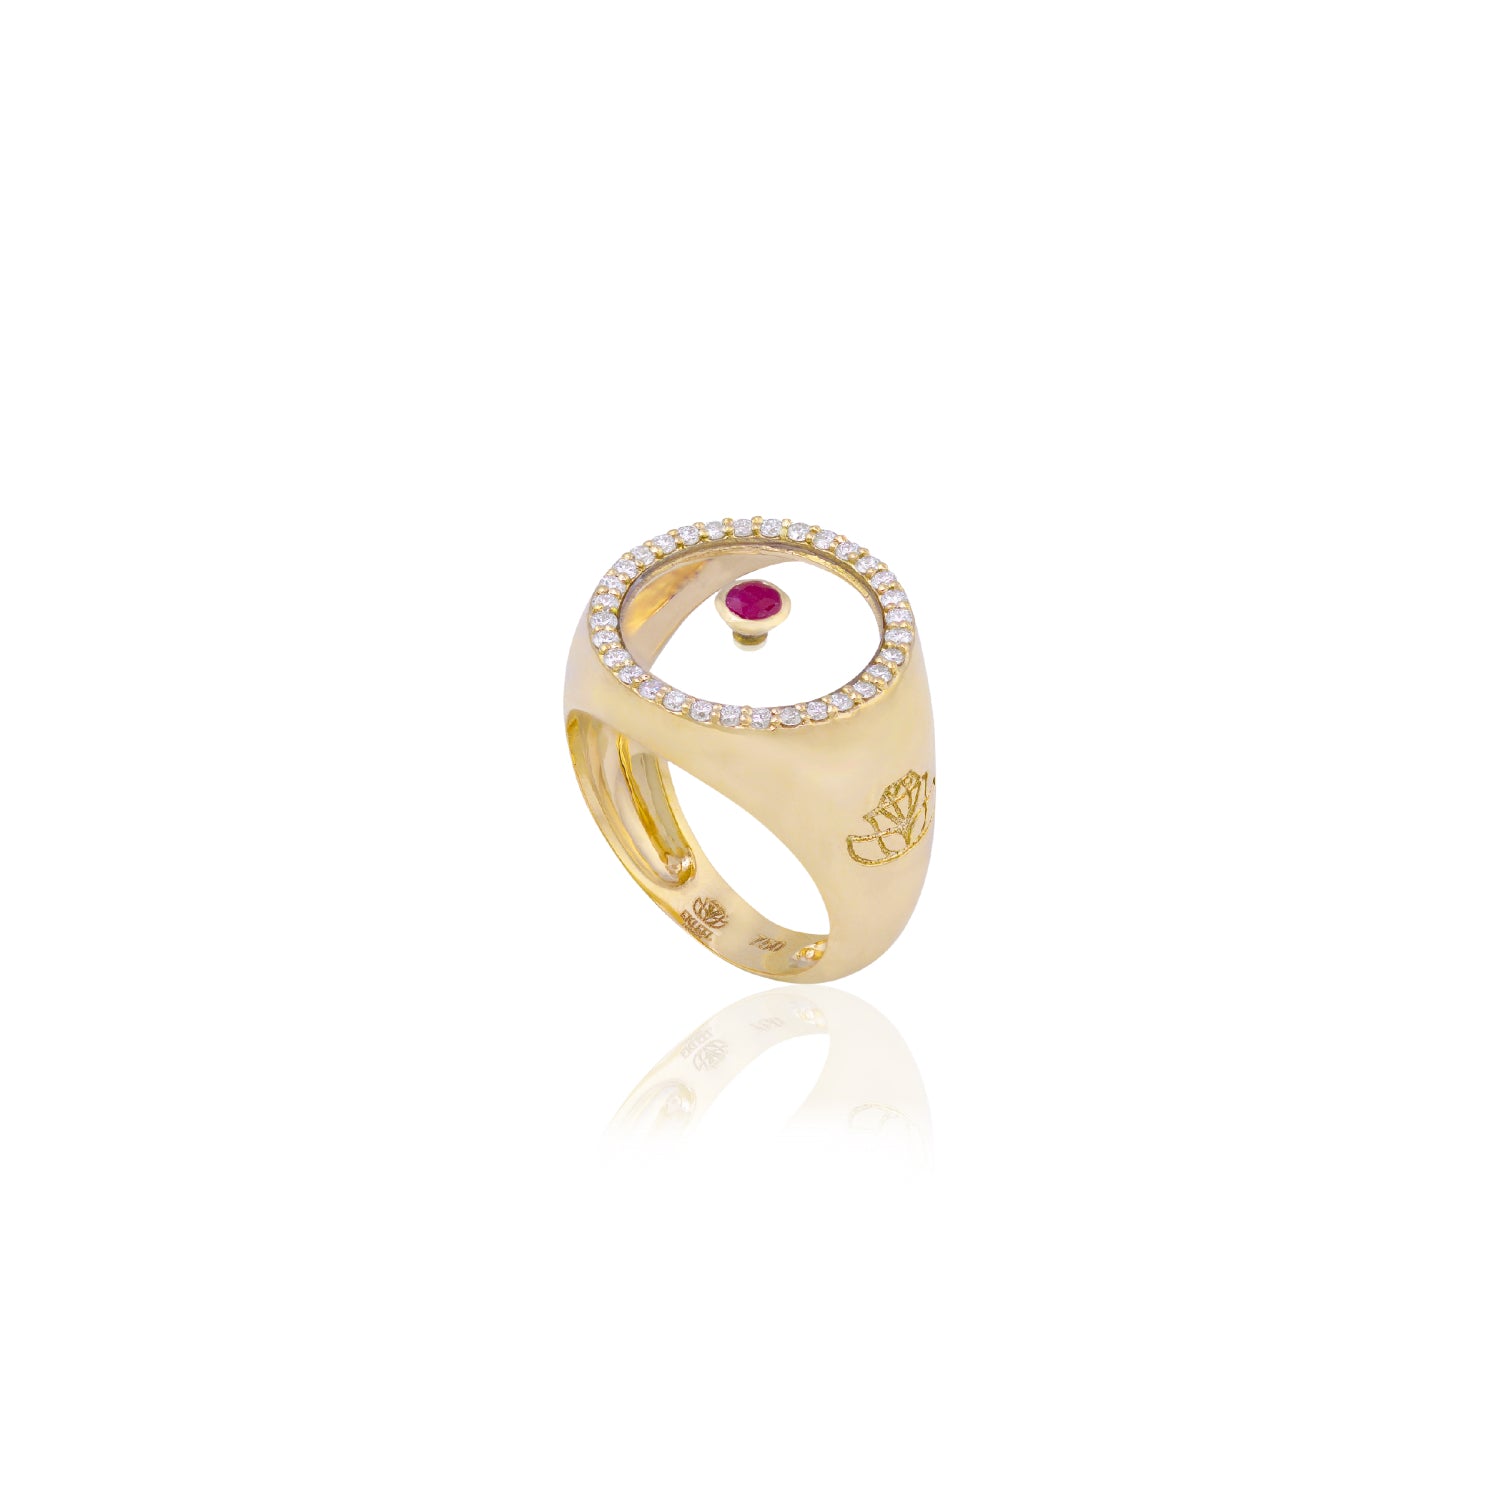 Ruby July Birthstone Ring in Yellow Gold